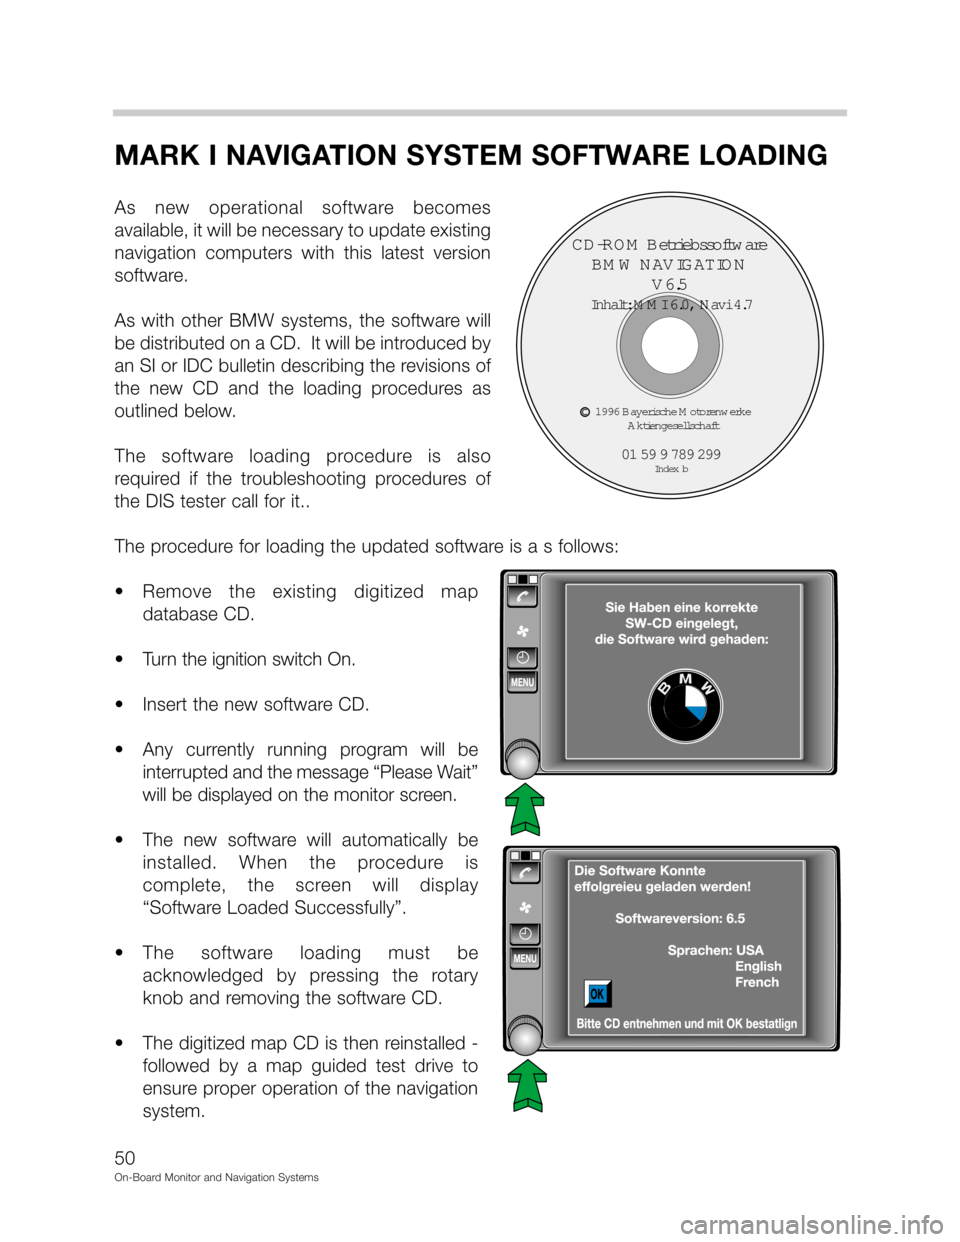 BMW 5 SERIES 1997 E39 On Board Monitor System Service Manual 	>
4
8

	5@3
8
 
% 

 % 	
&6%




&
 	
 %   &
%
 